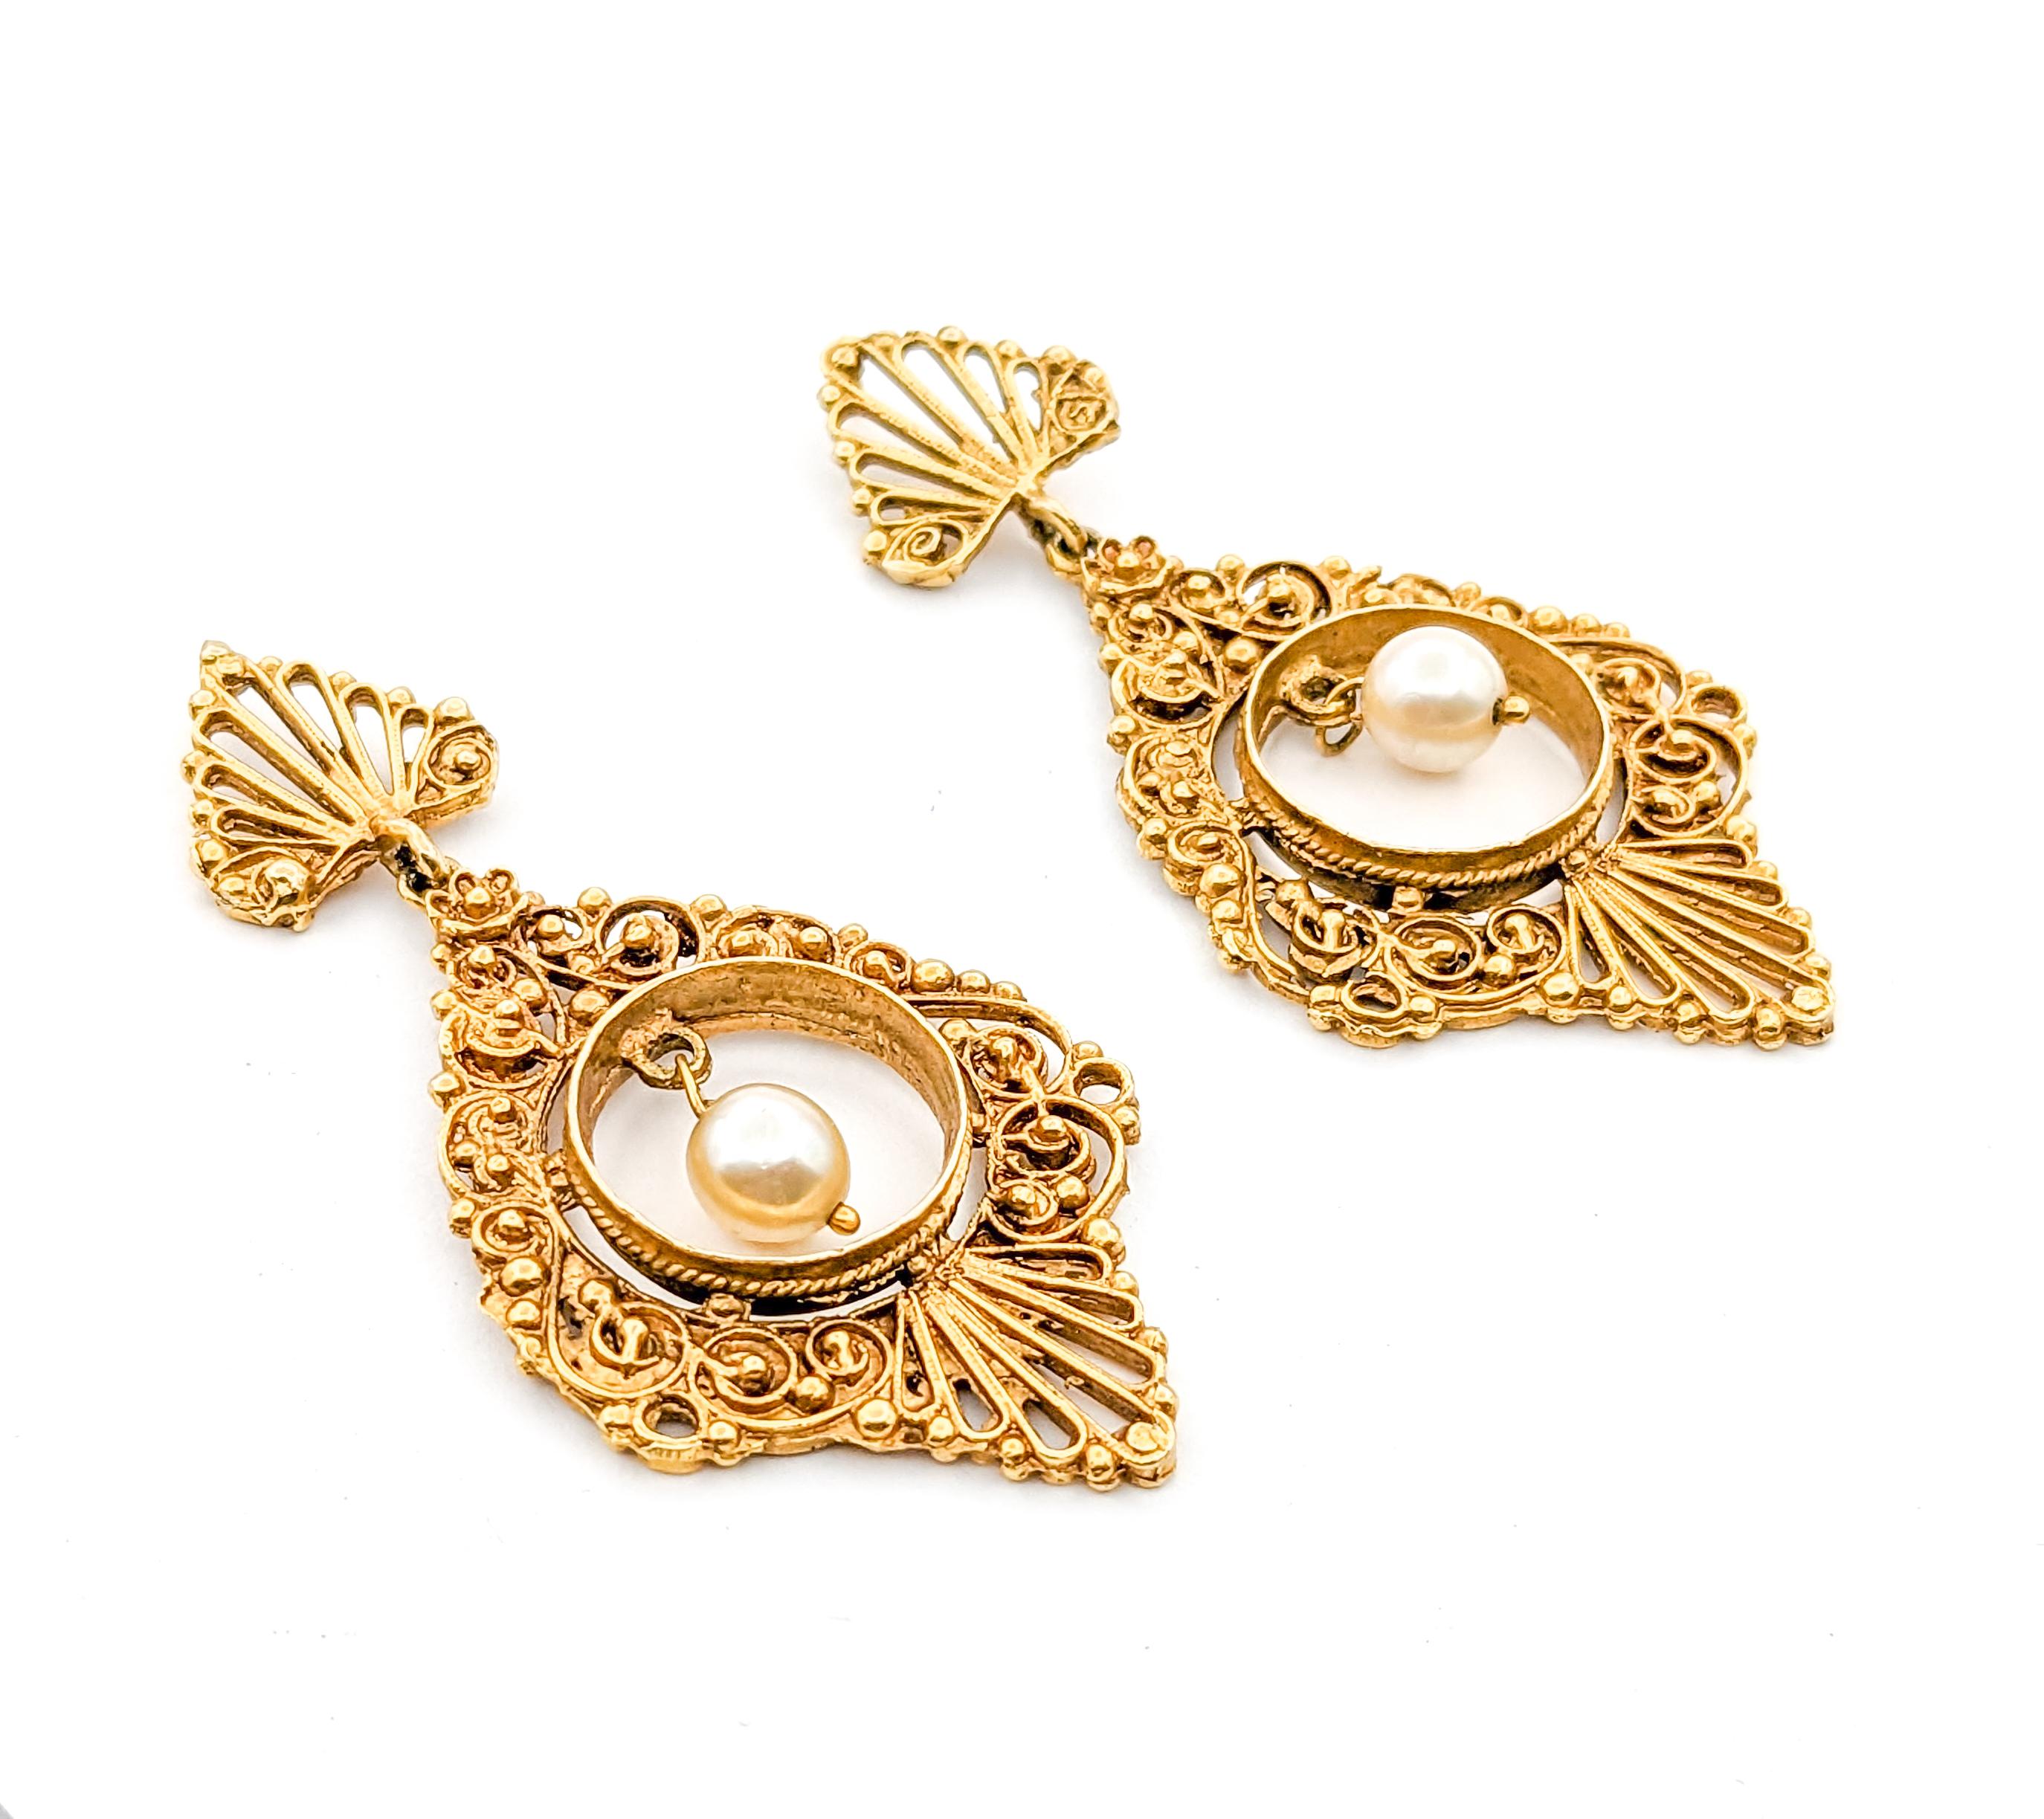 Romantic Vintage Filigree Pearl Drop Earrings in Yellow Gold

Introducing our exquisite vintage earrings, meticulously handcrafted from the finest 14k yellow gold, a testament to timeless elegance and superior craftsmanship. At the heart of each